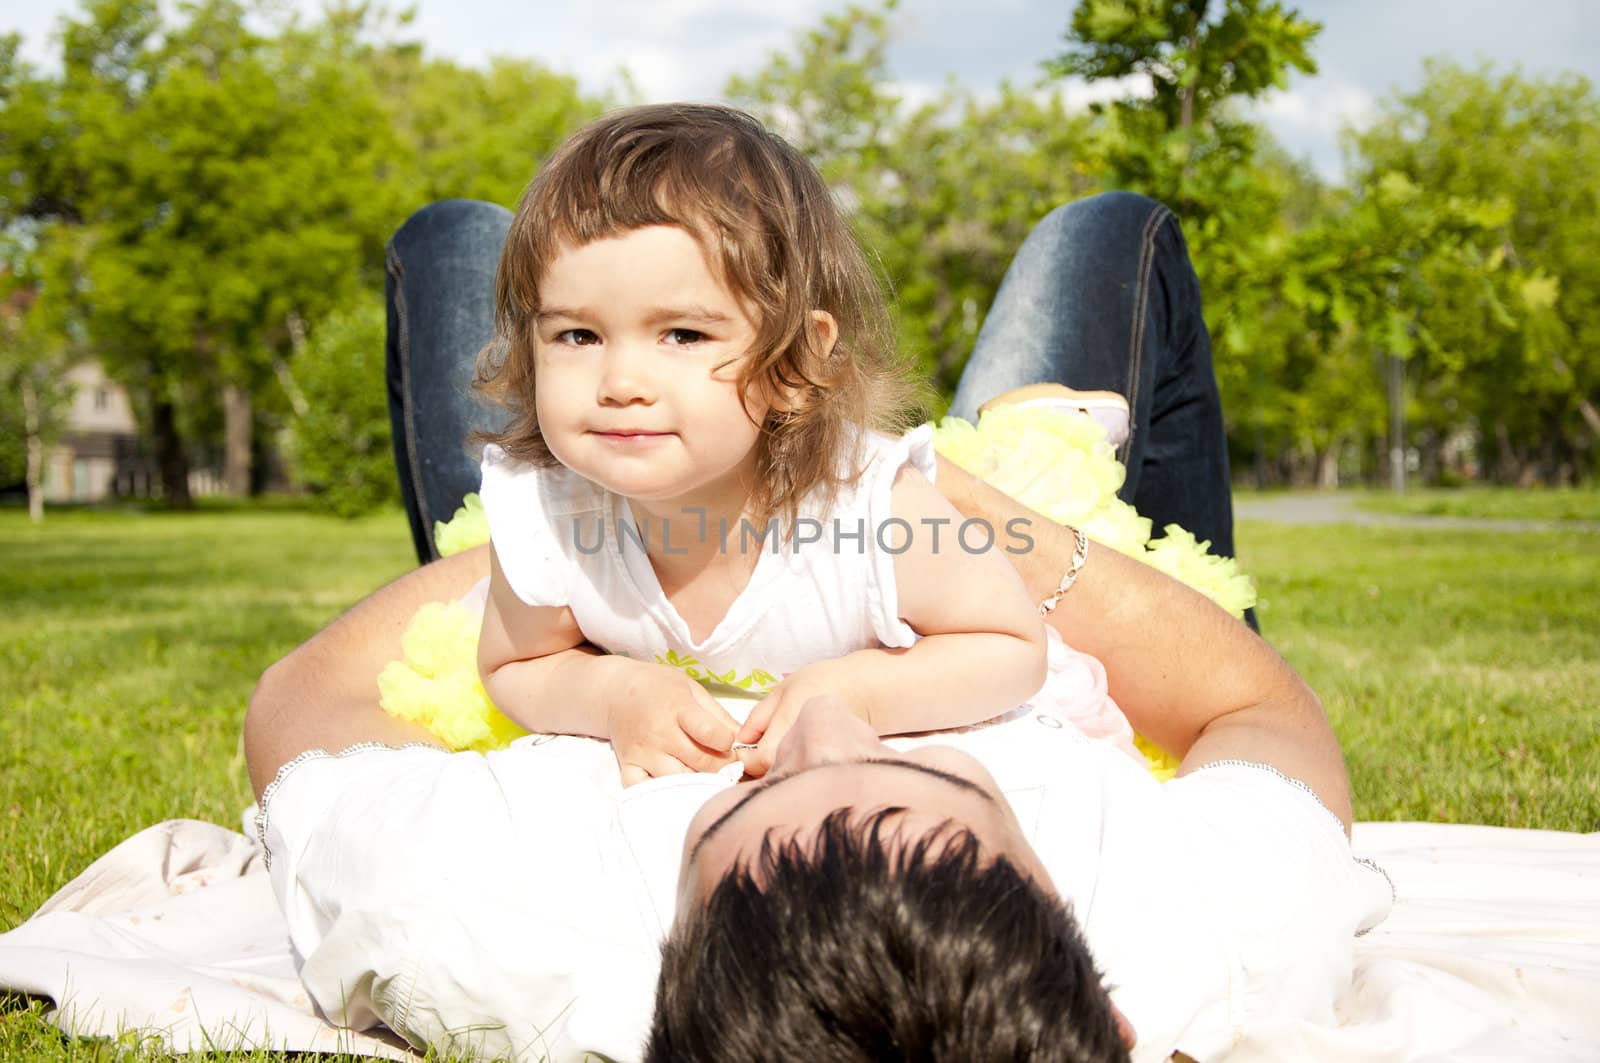 The father holds the cheerful daughter in his arms